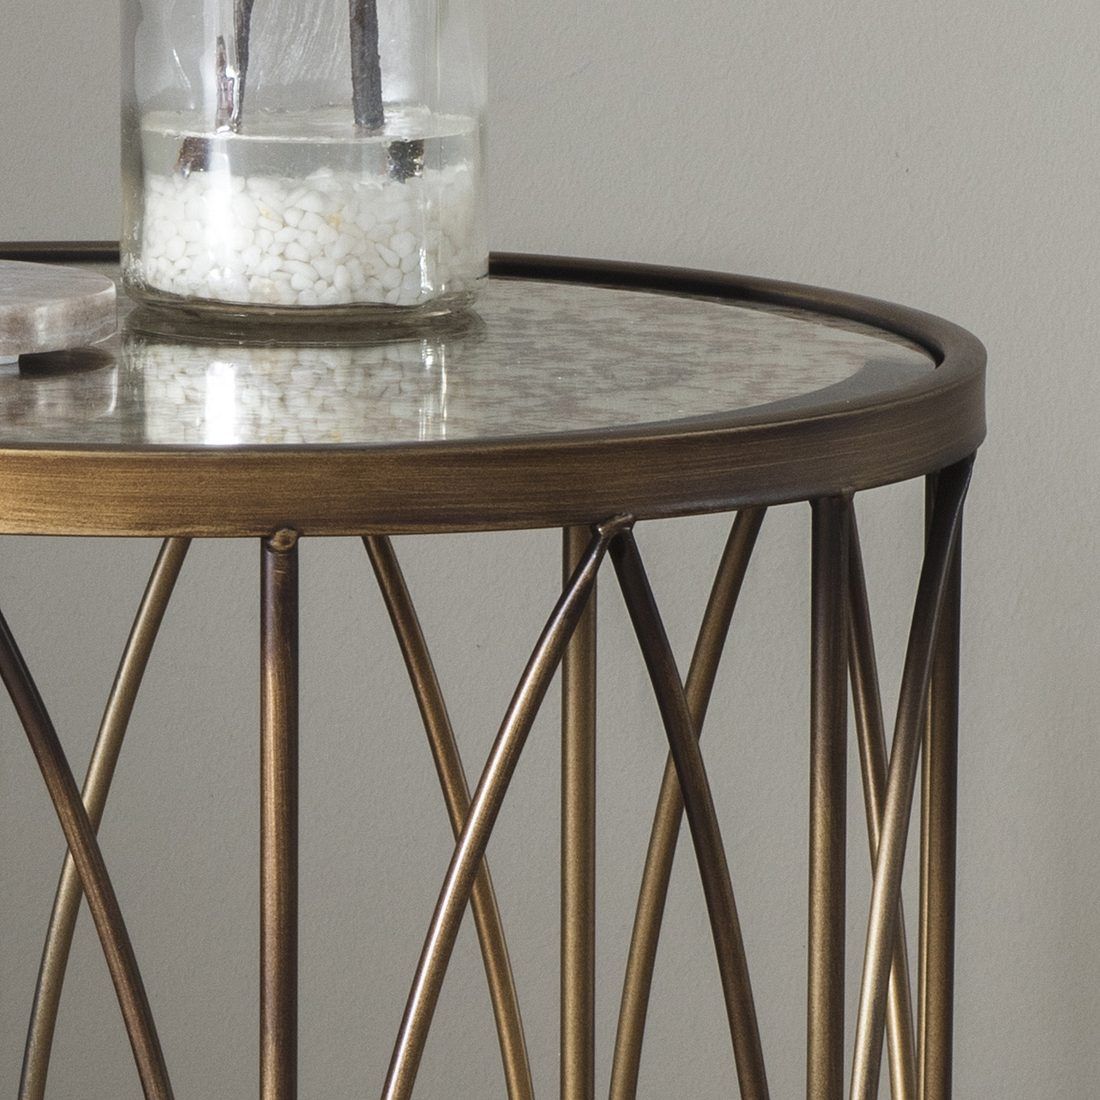 Antique Gold Round Side Table With Vintage Mirror Top | Primrose & Plum Throughout Antique Gold And Glass Console Tables (View 11 of 20)